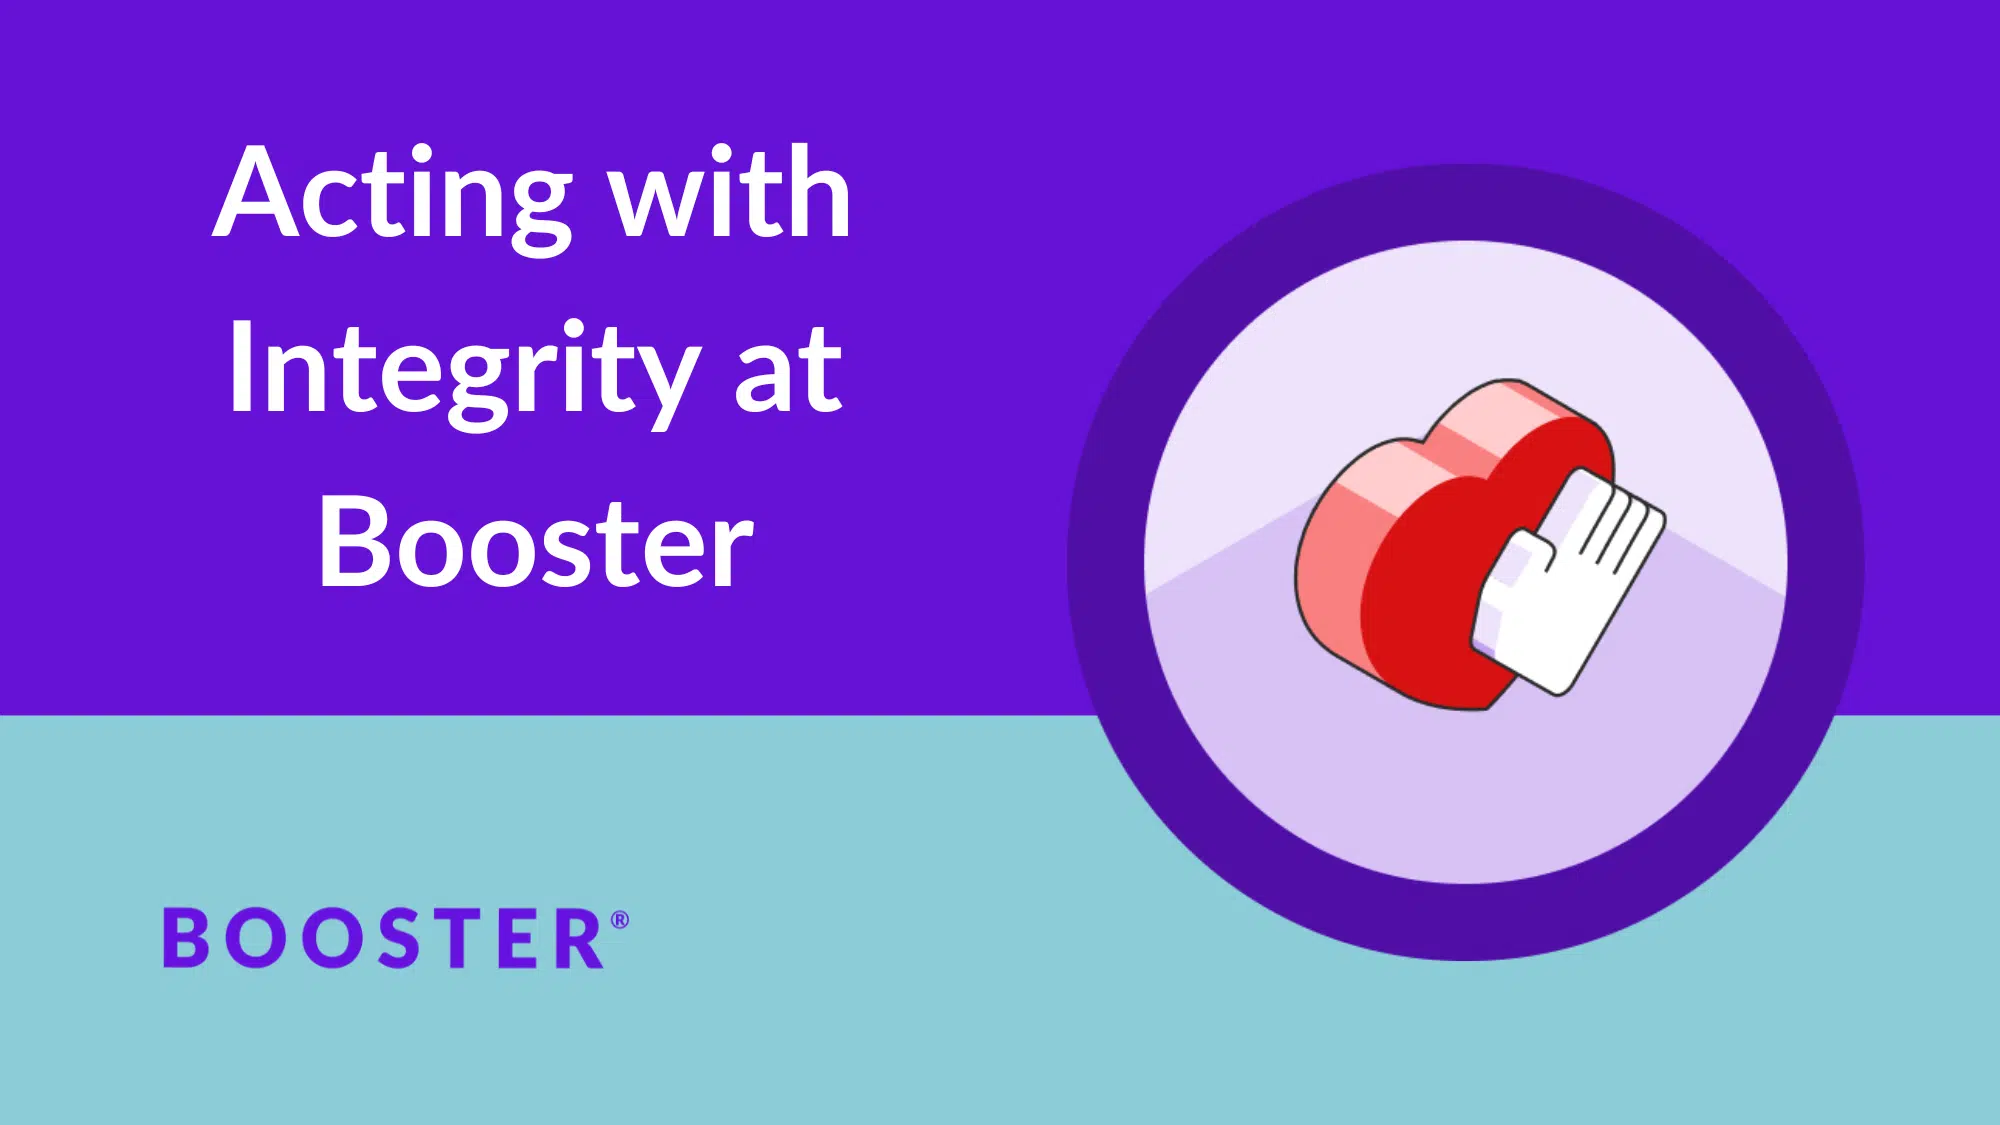 Title image: Reads "Acting with Integrity at Booster" while a badge with a heart floats on purple and deal background.